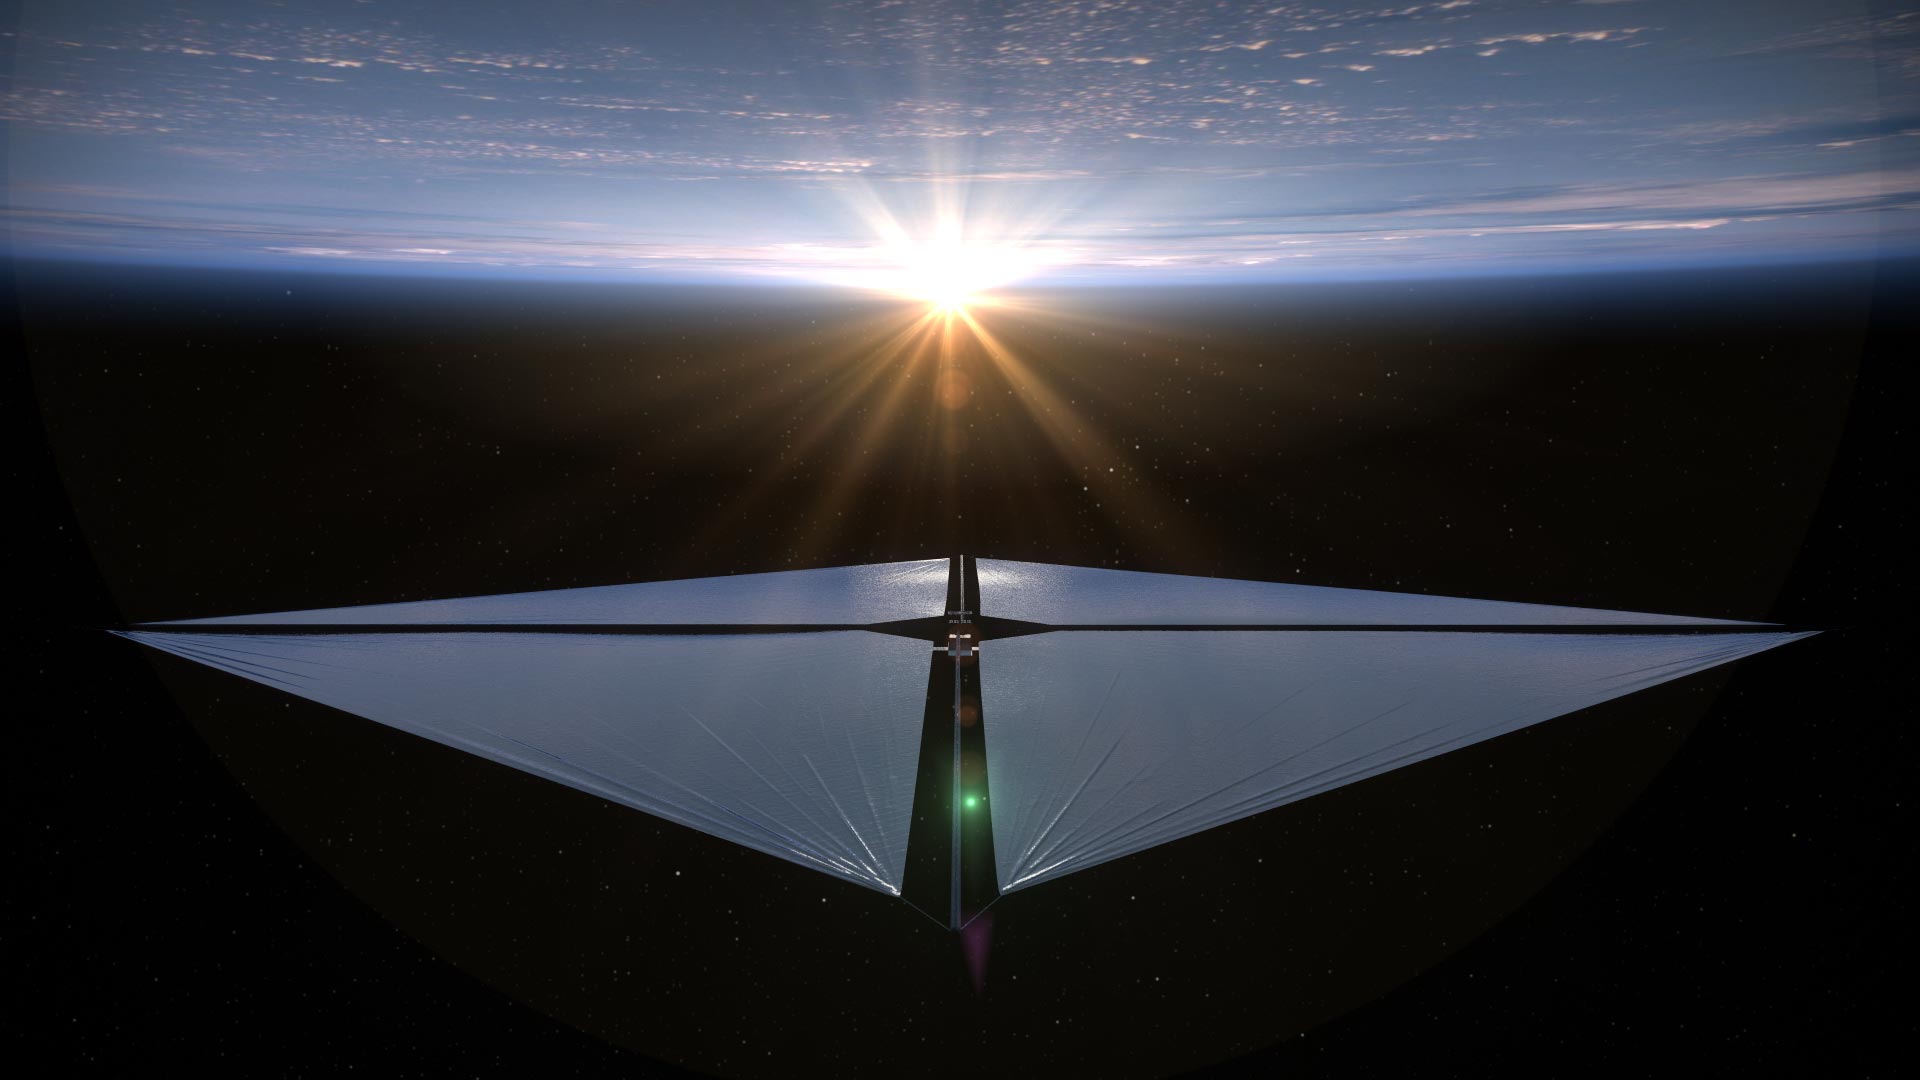 Liftoff! NASA's Next-Generation Solar Sail Boom Technology Launched - SciTechDaily